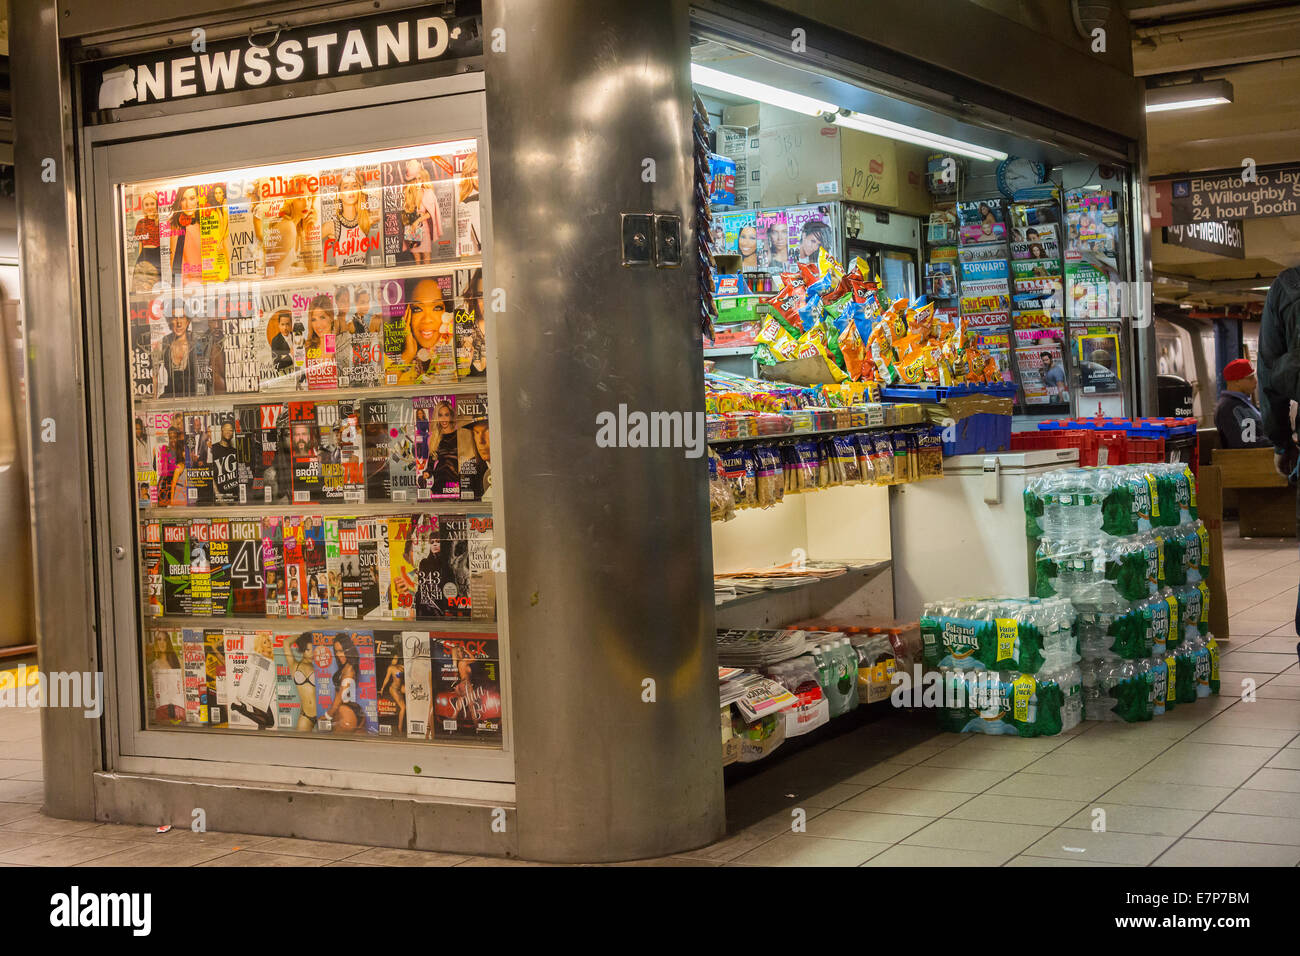 A newsstand in the Times Square subway station in New York Stock Photo